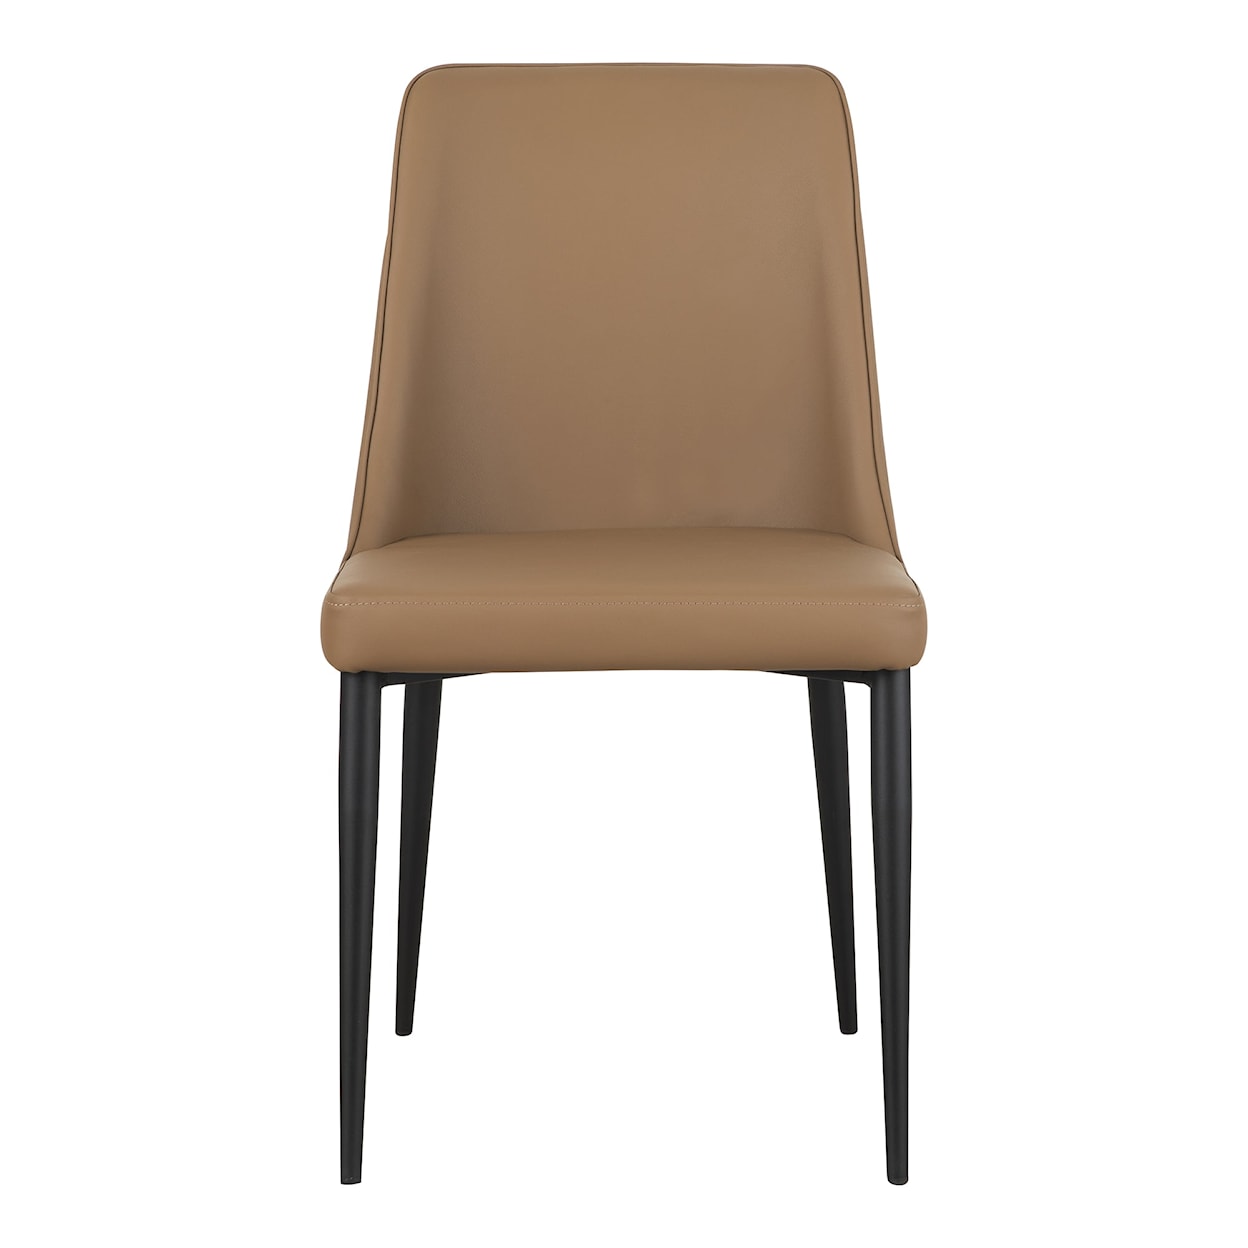 Moe's Home Collection Lula Vegan Leather Dining Chair